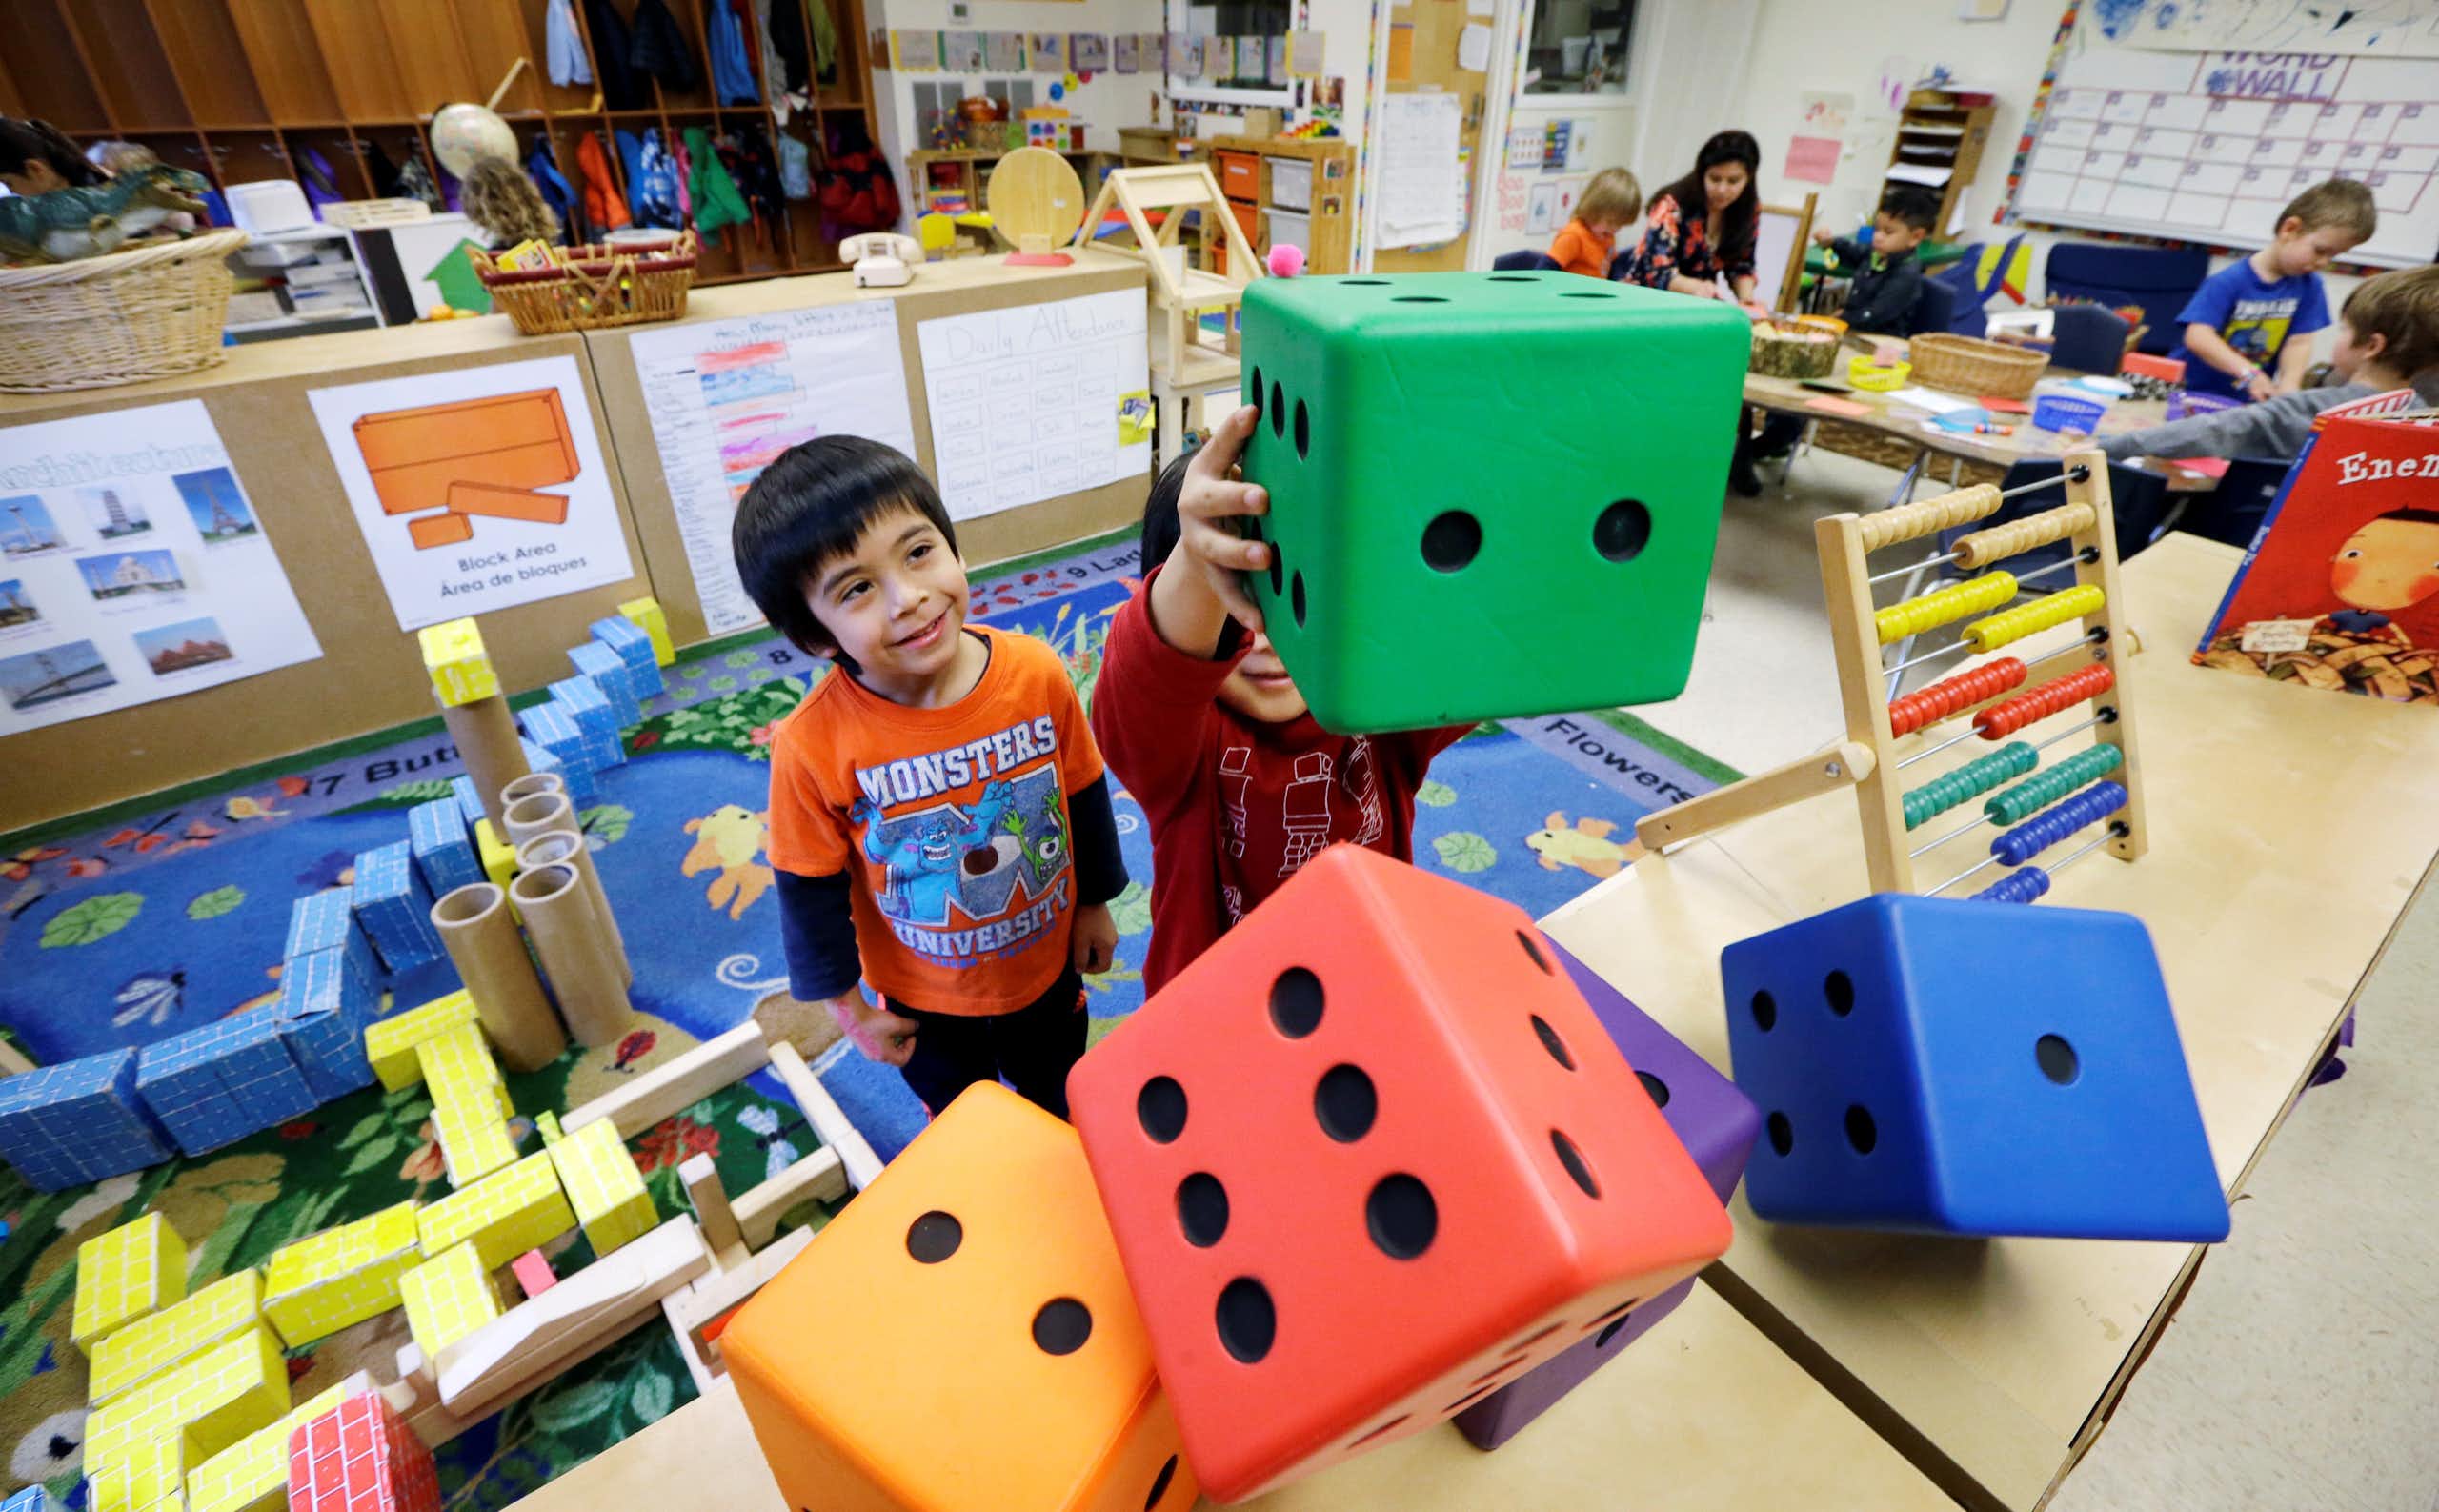 Young children play with giant, multicolored dice in a classroom.